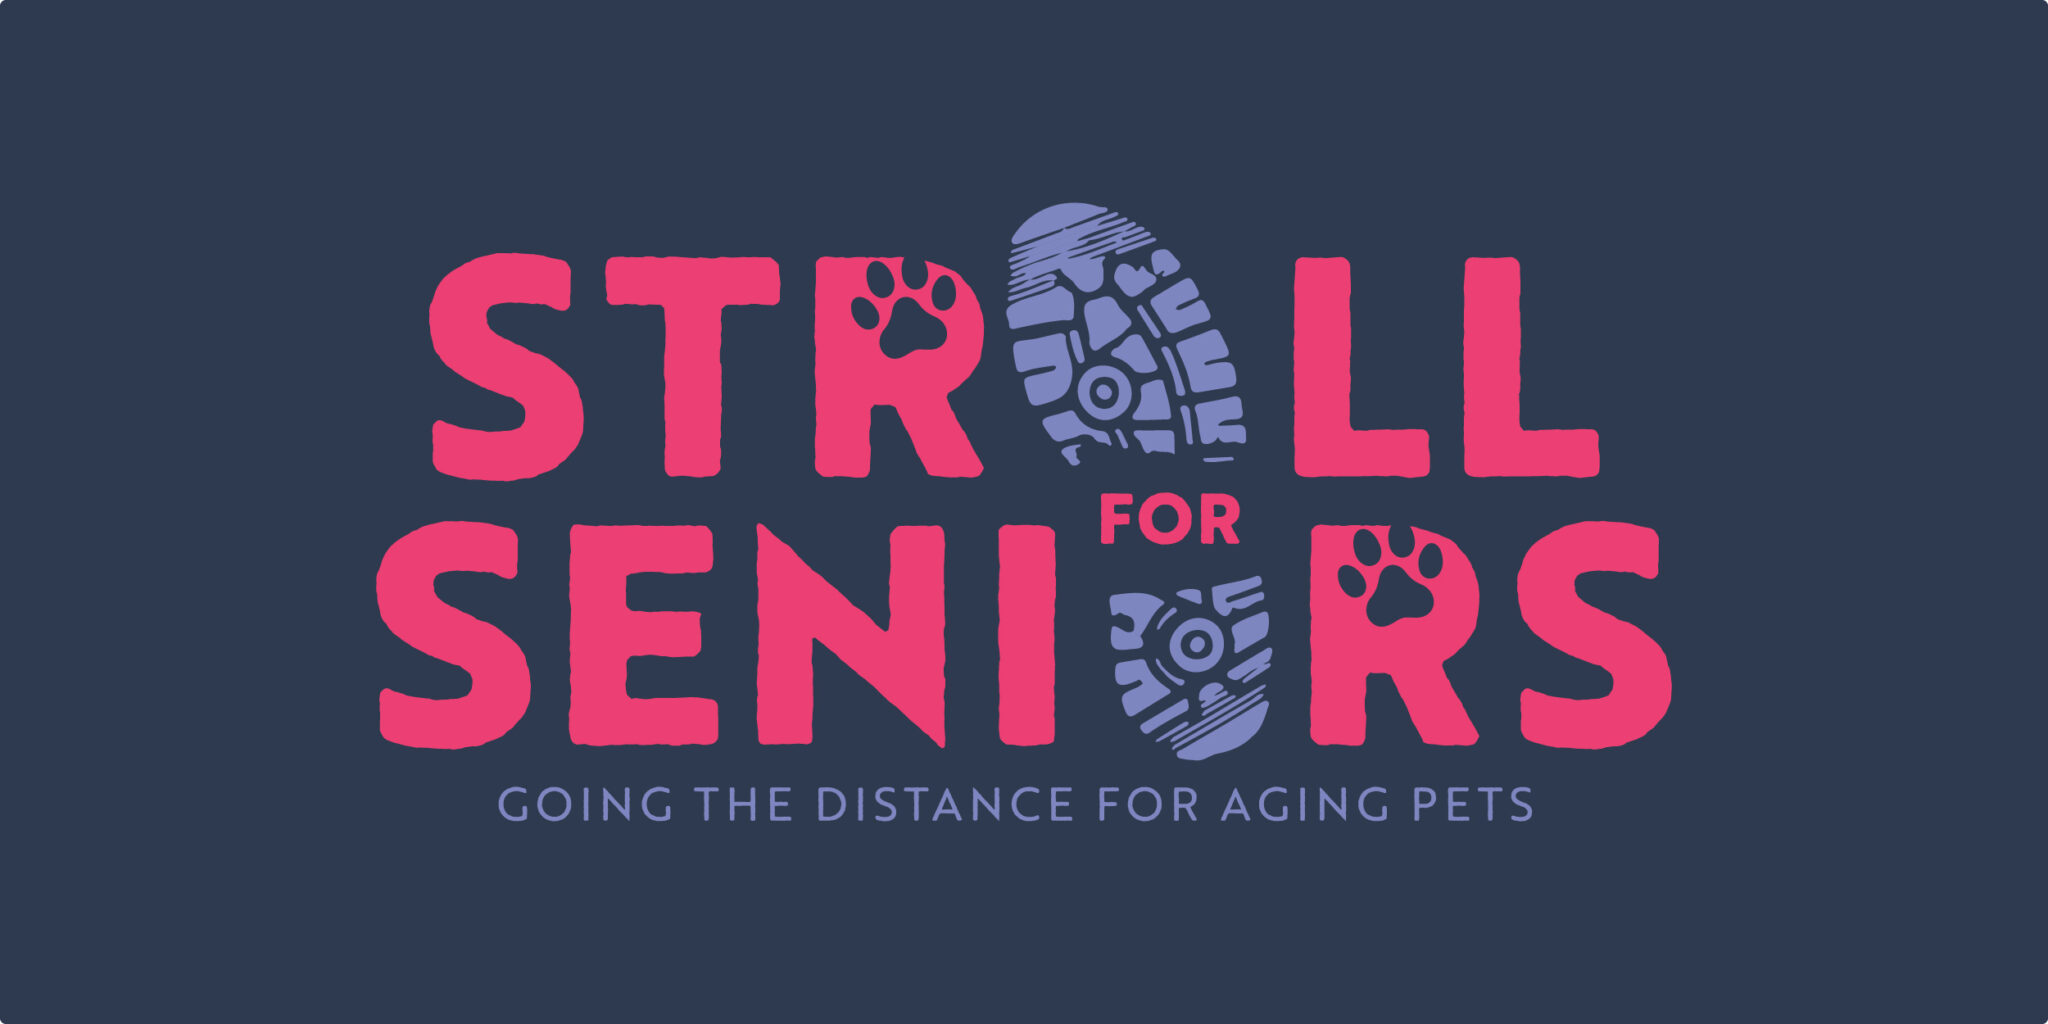 Frosted Faces Foundation Stroll for Seniors fun run design, created by Šek Design Studio